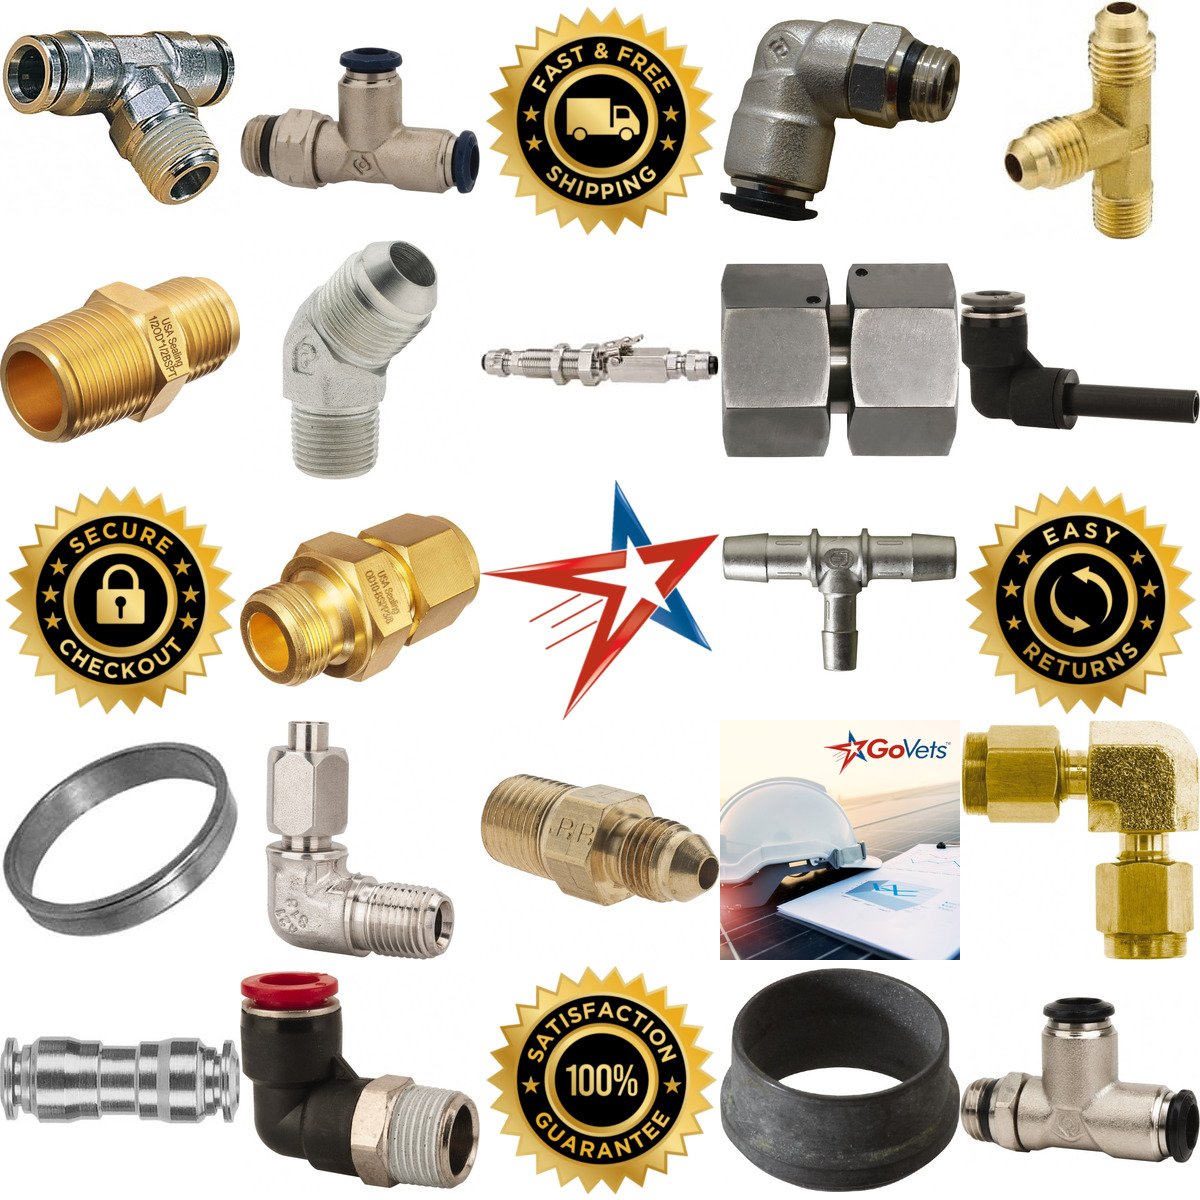 A selection of Metal Tube Fittings products on GoVets